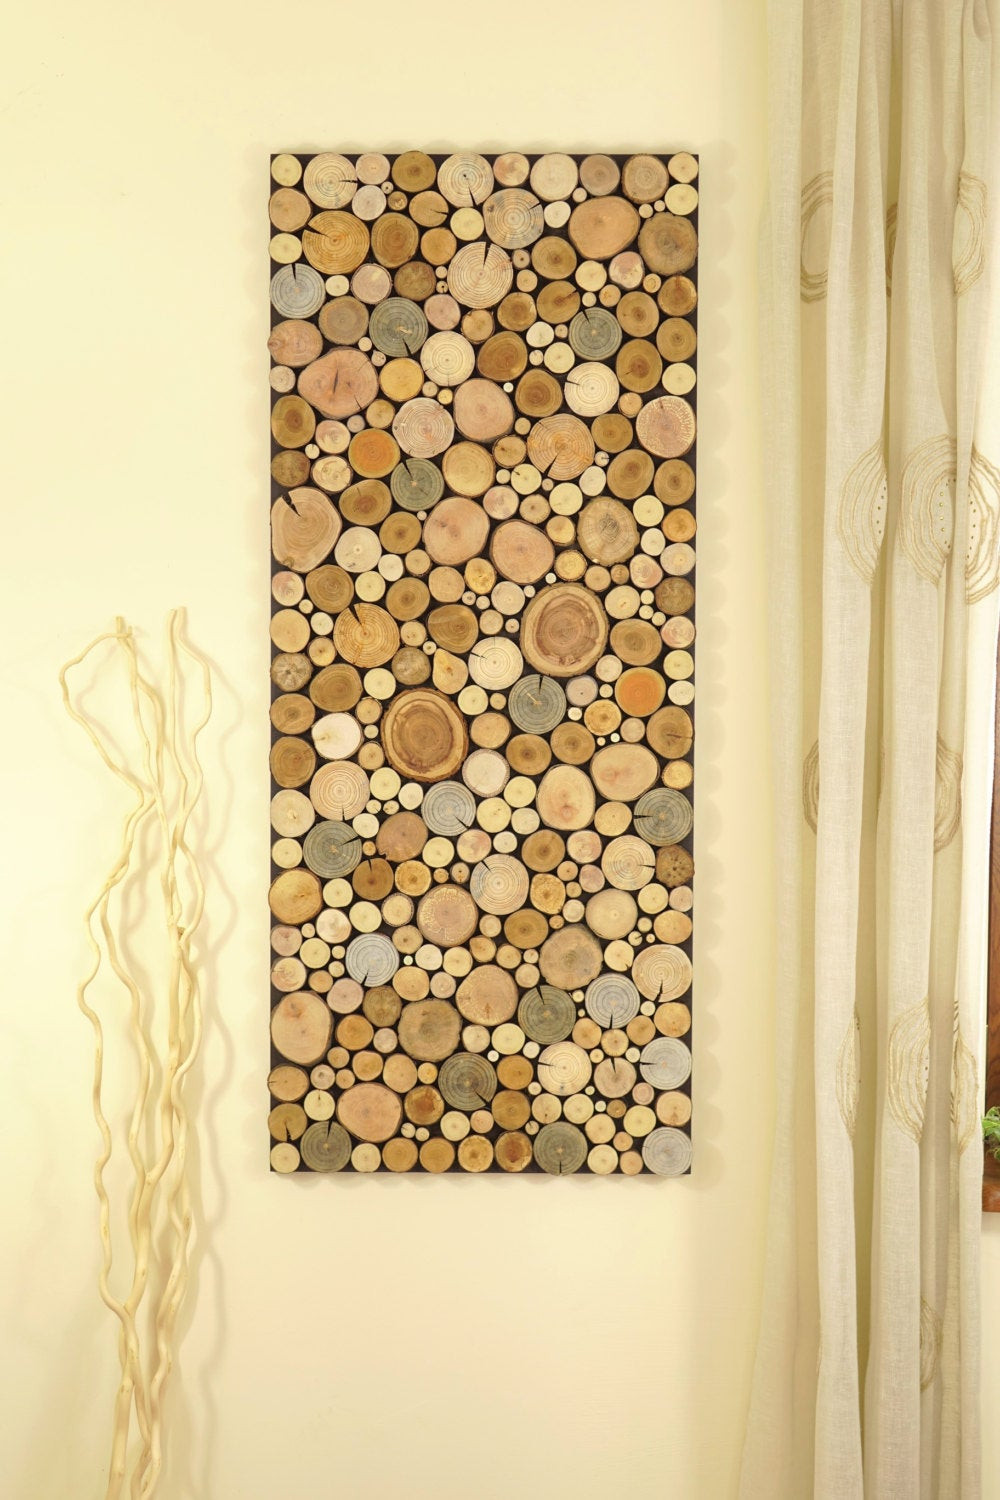 Best ideas about Panel Wall Art . Save or Pin reclaimed wood art of tree rounds wall panel Environment wall Now.